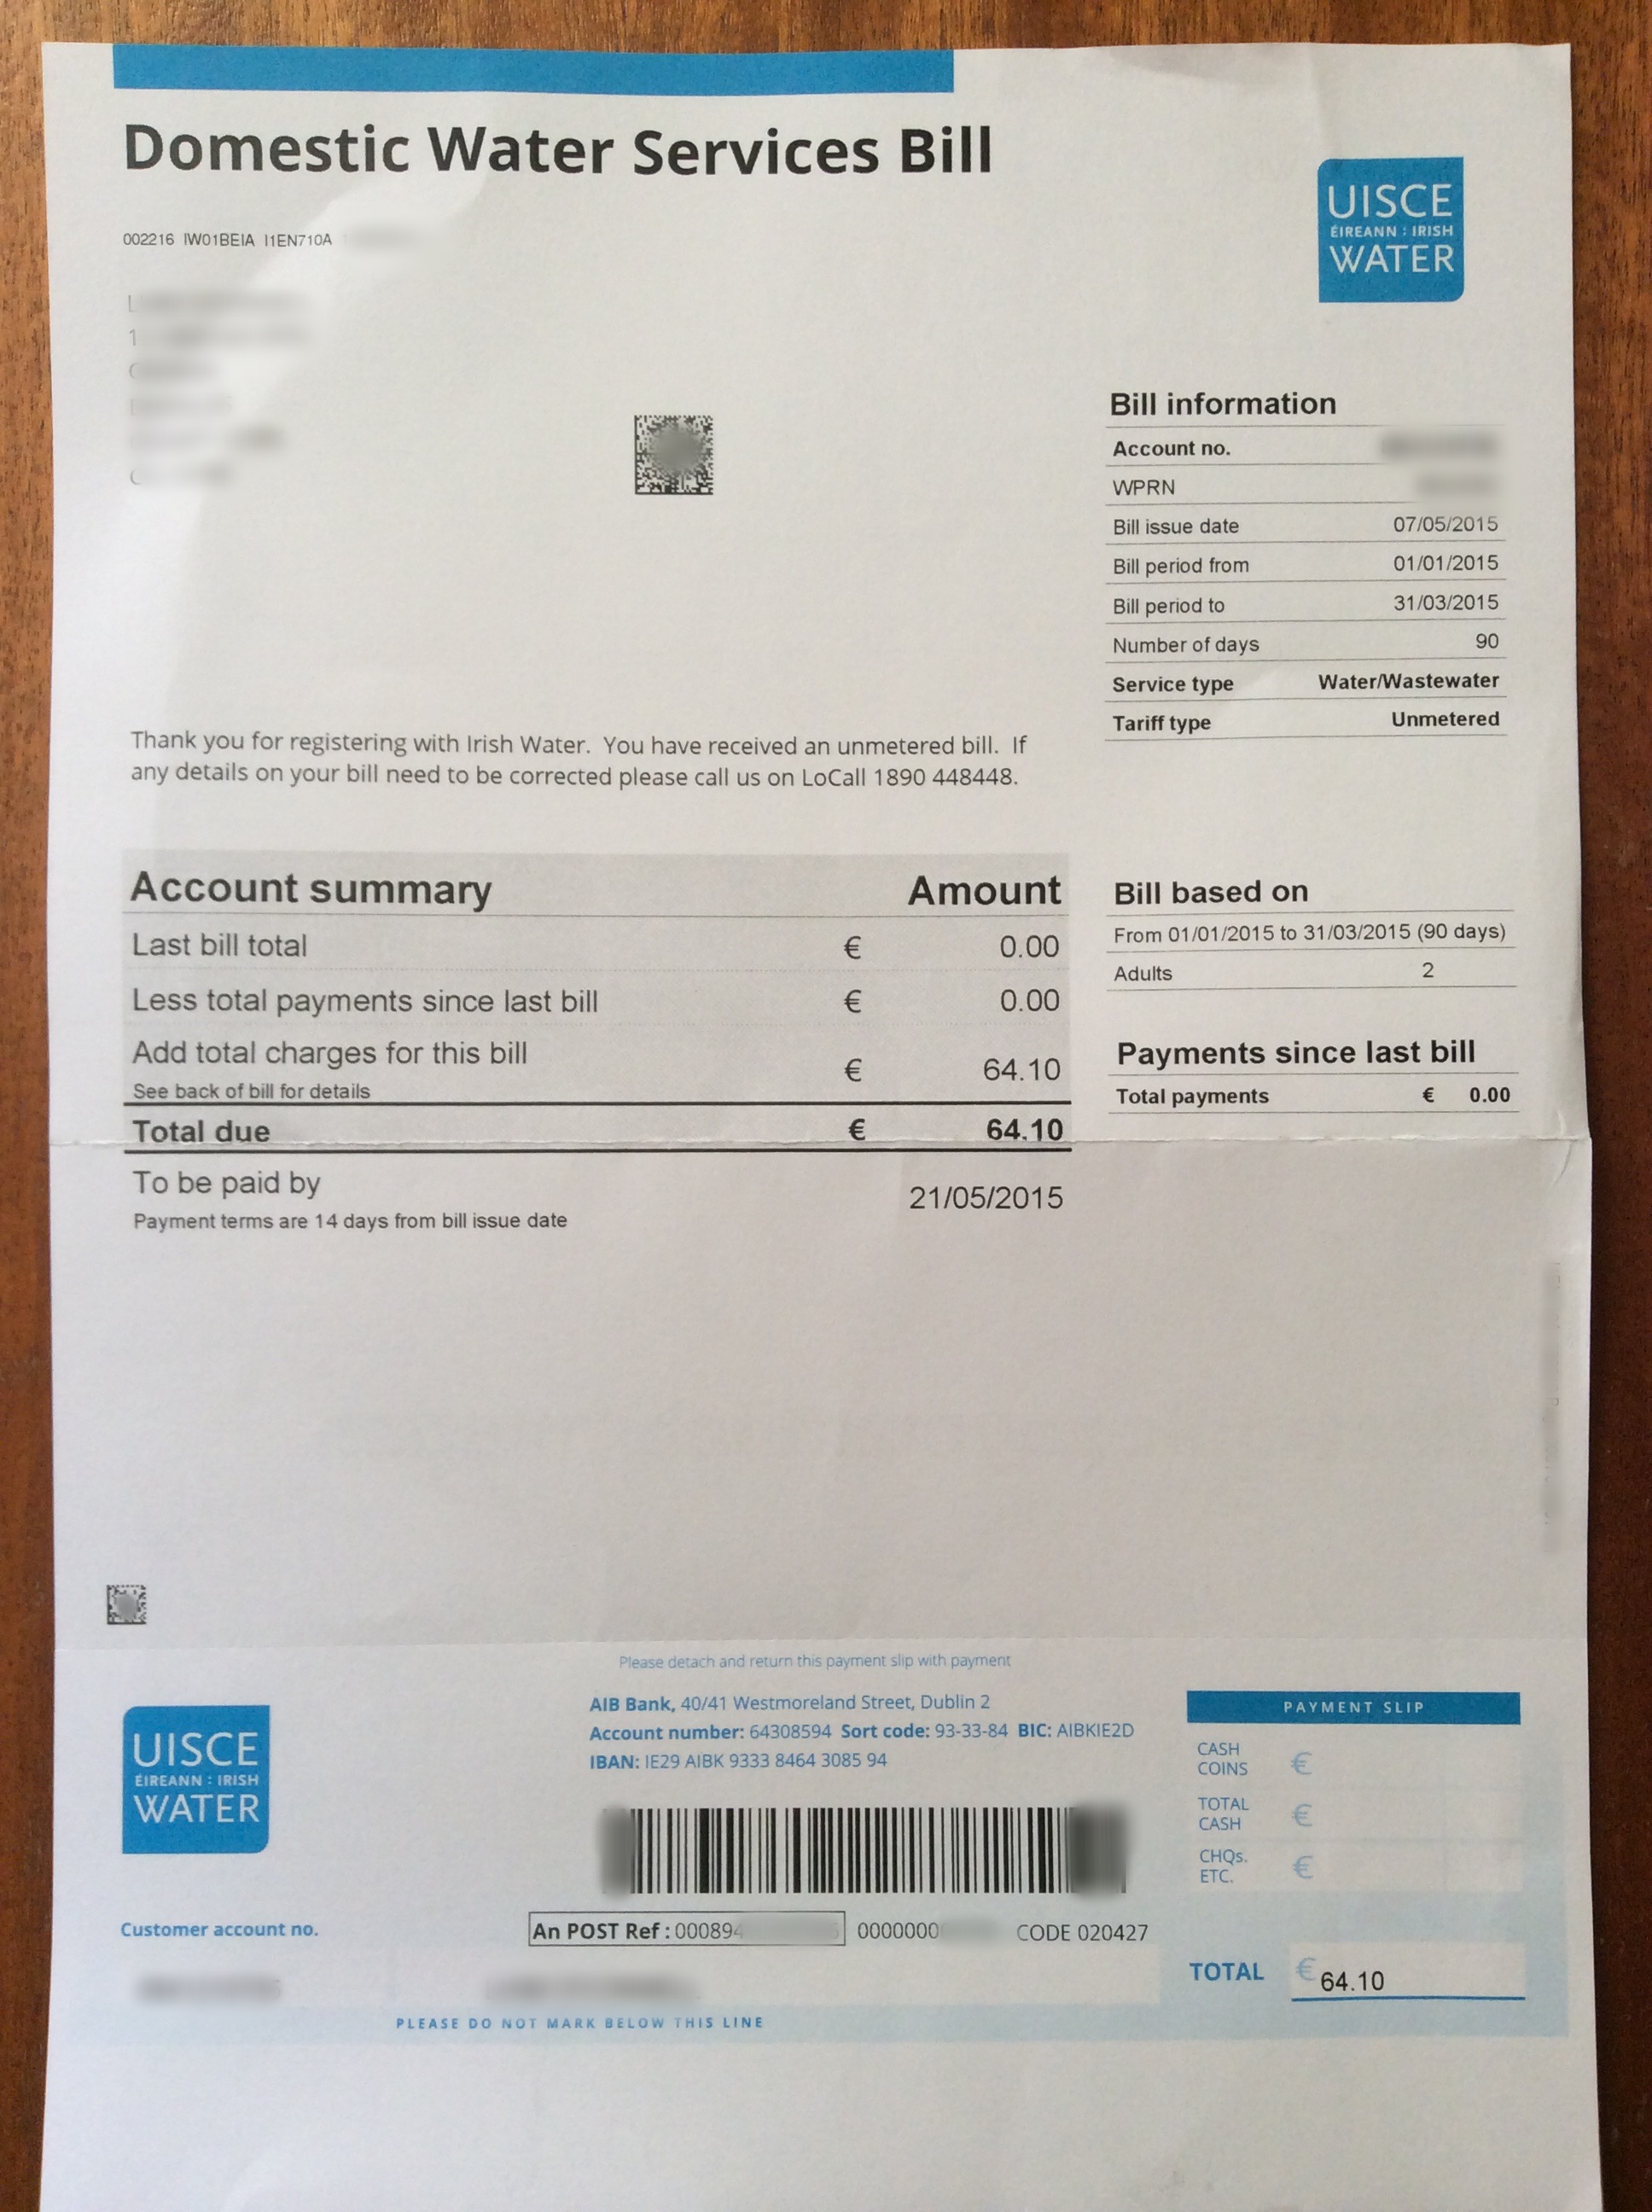 So this is what an Irish Water utility bill looks like